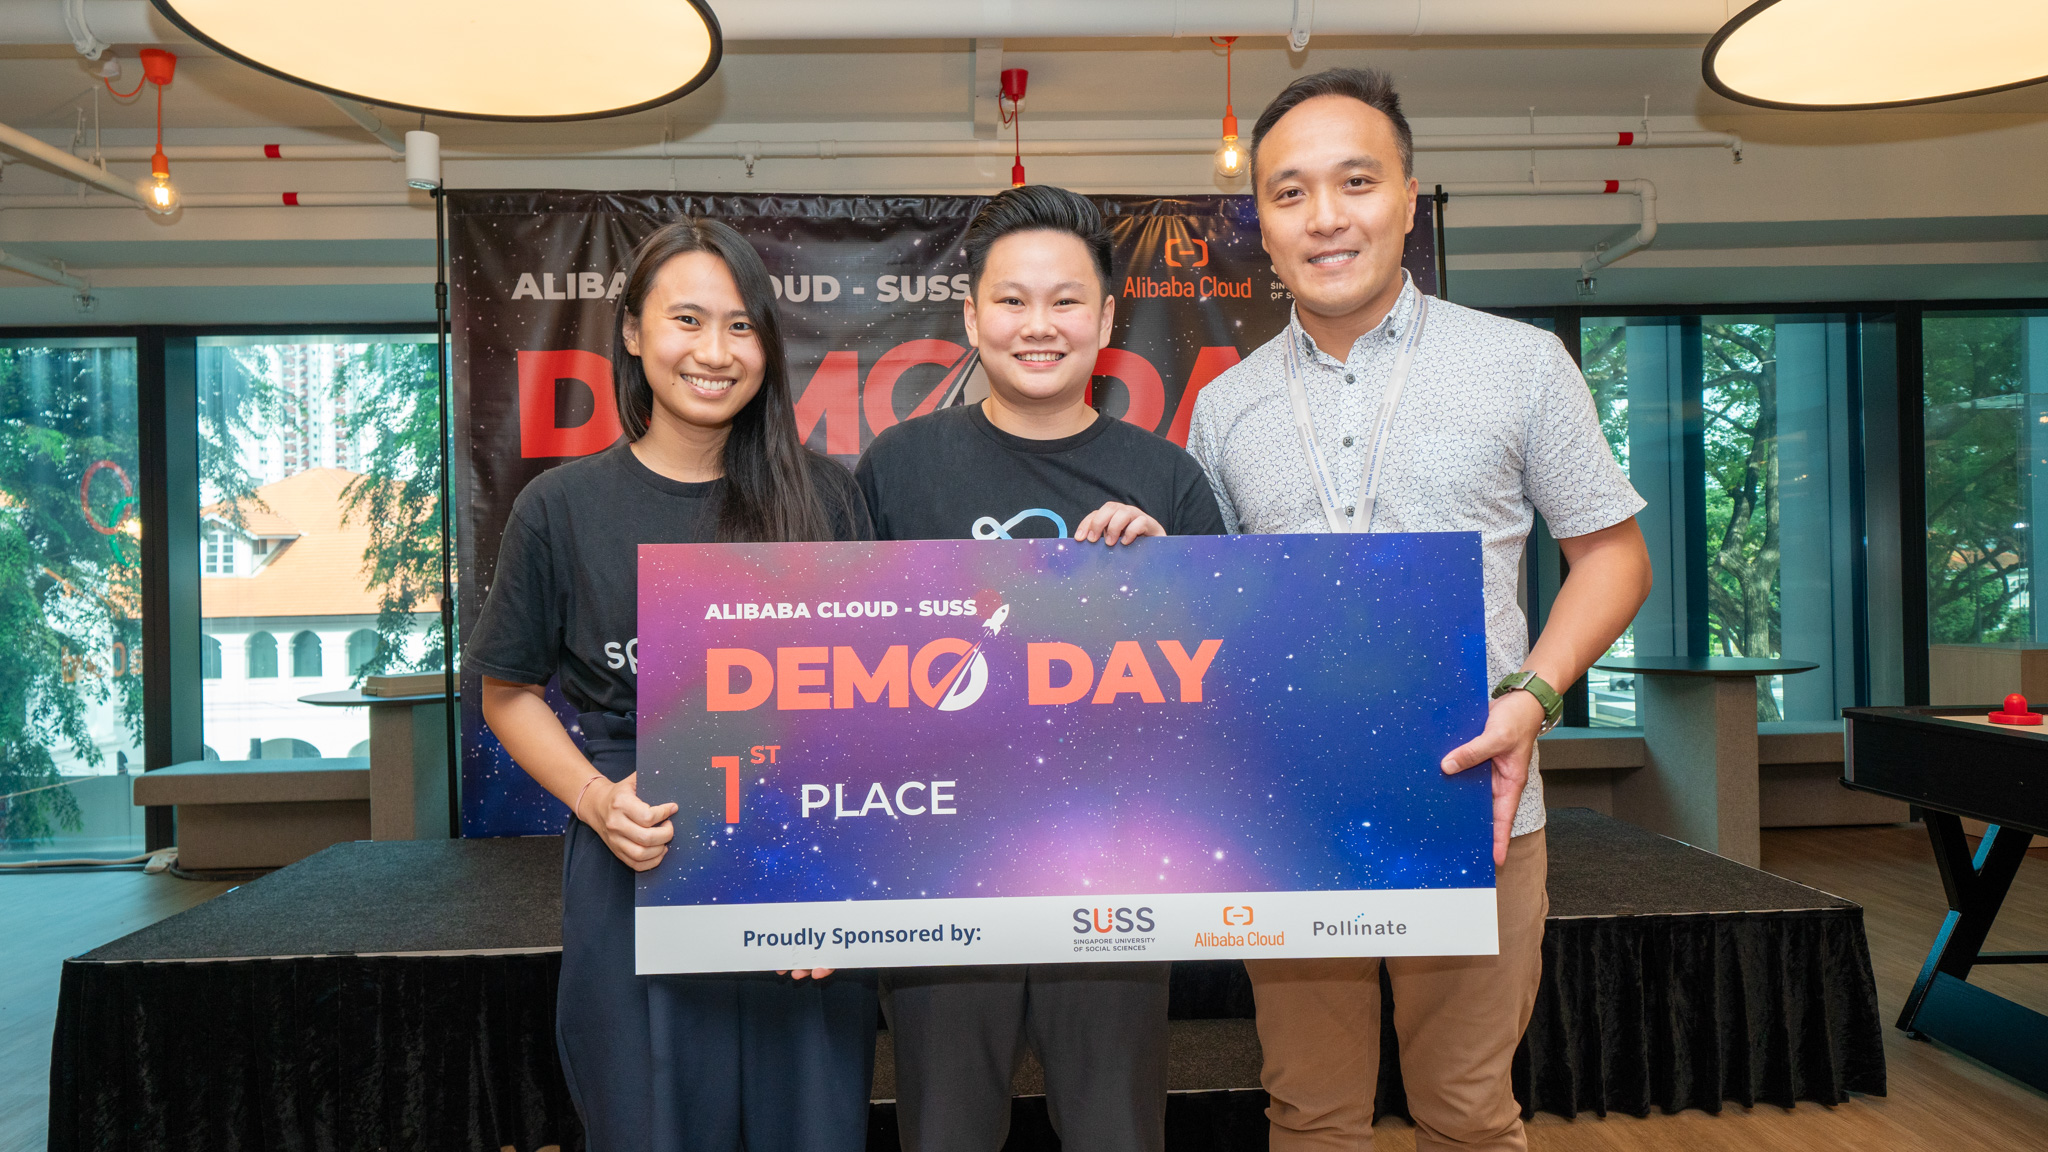 SpedGrow, the proud winners of the Alibaba Cloud-SUSS Demo Day, joyfully accepting their well-deserved prize with Chris Tan, Director of Sales and Business Development at Alibaba Cloud.